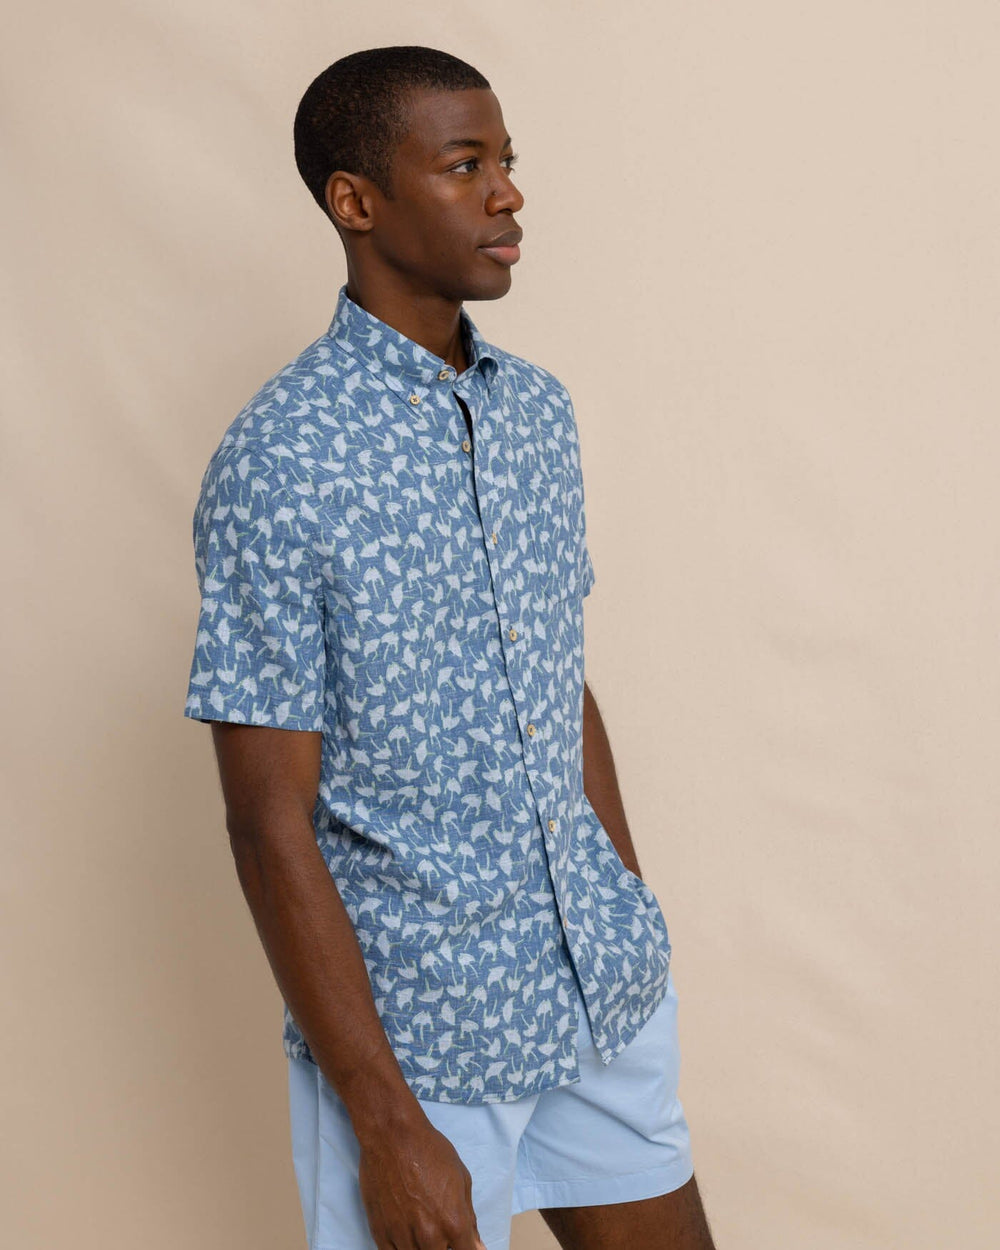 The front view of the Southern Tide Summer Rays Short Sleeve Sport Shirt by Southern Tide - Coronet Blue